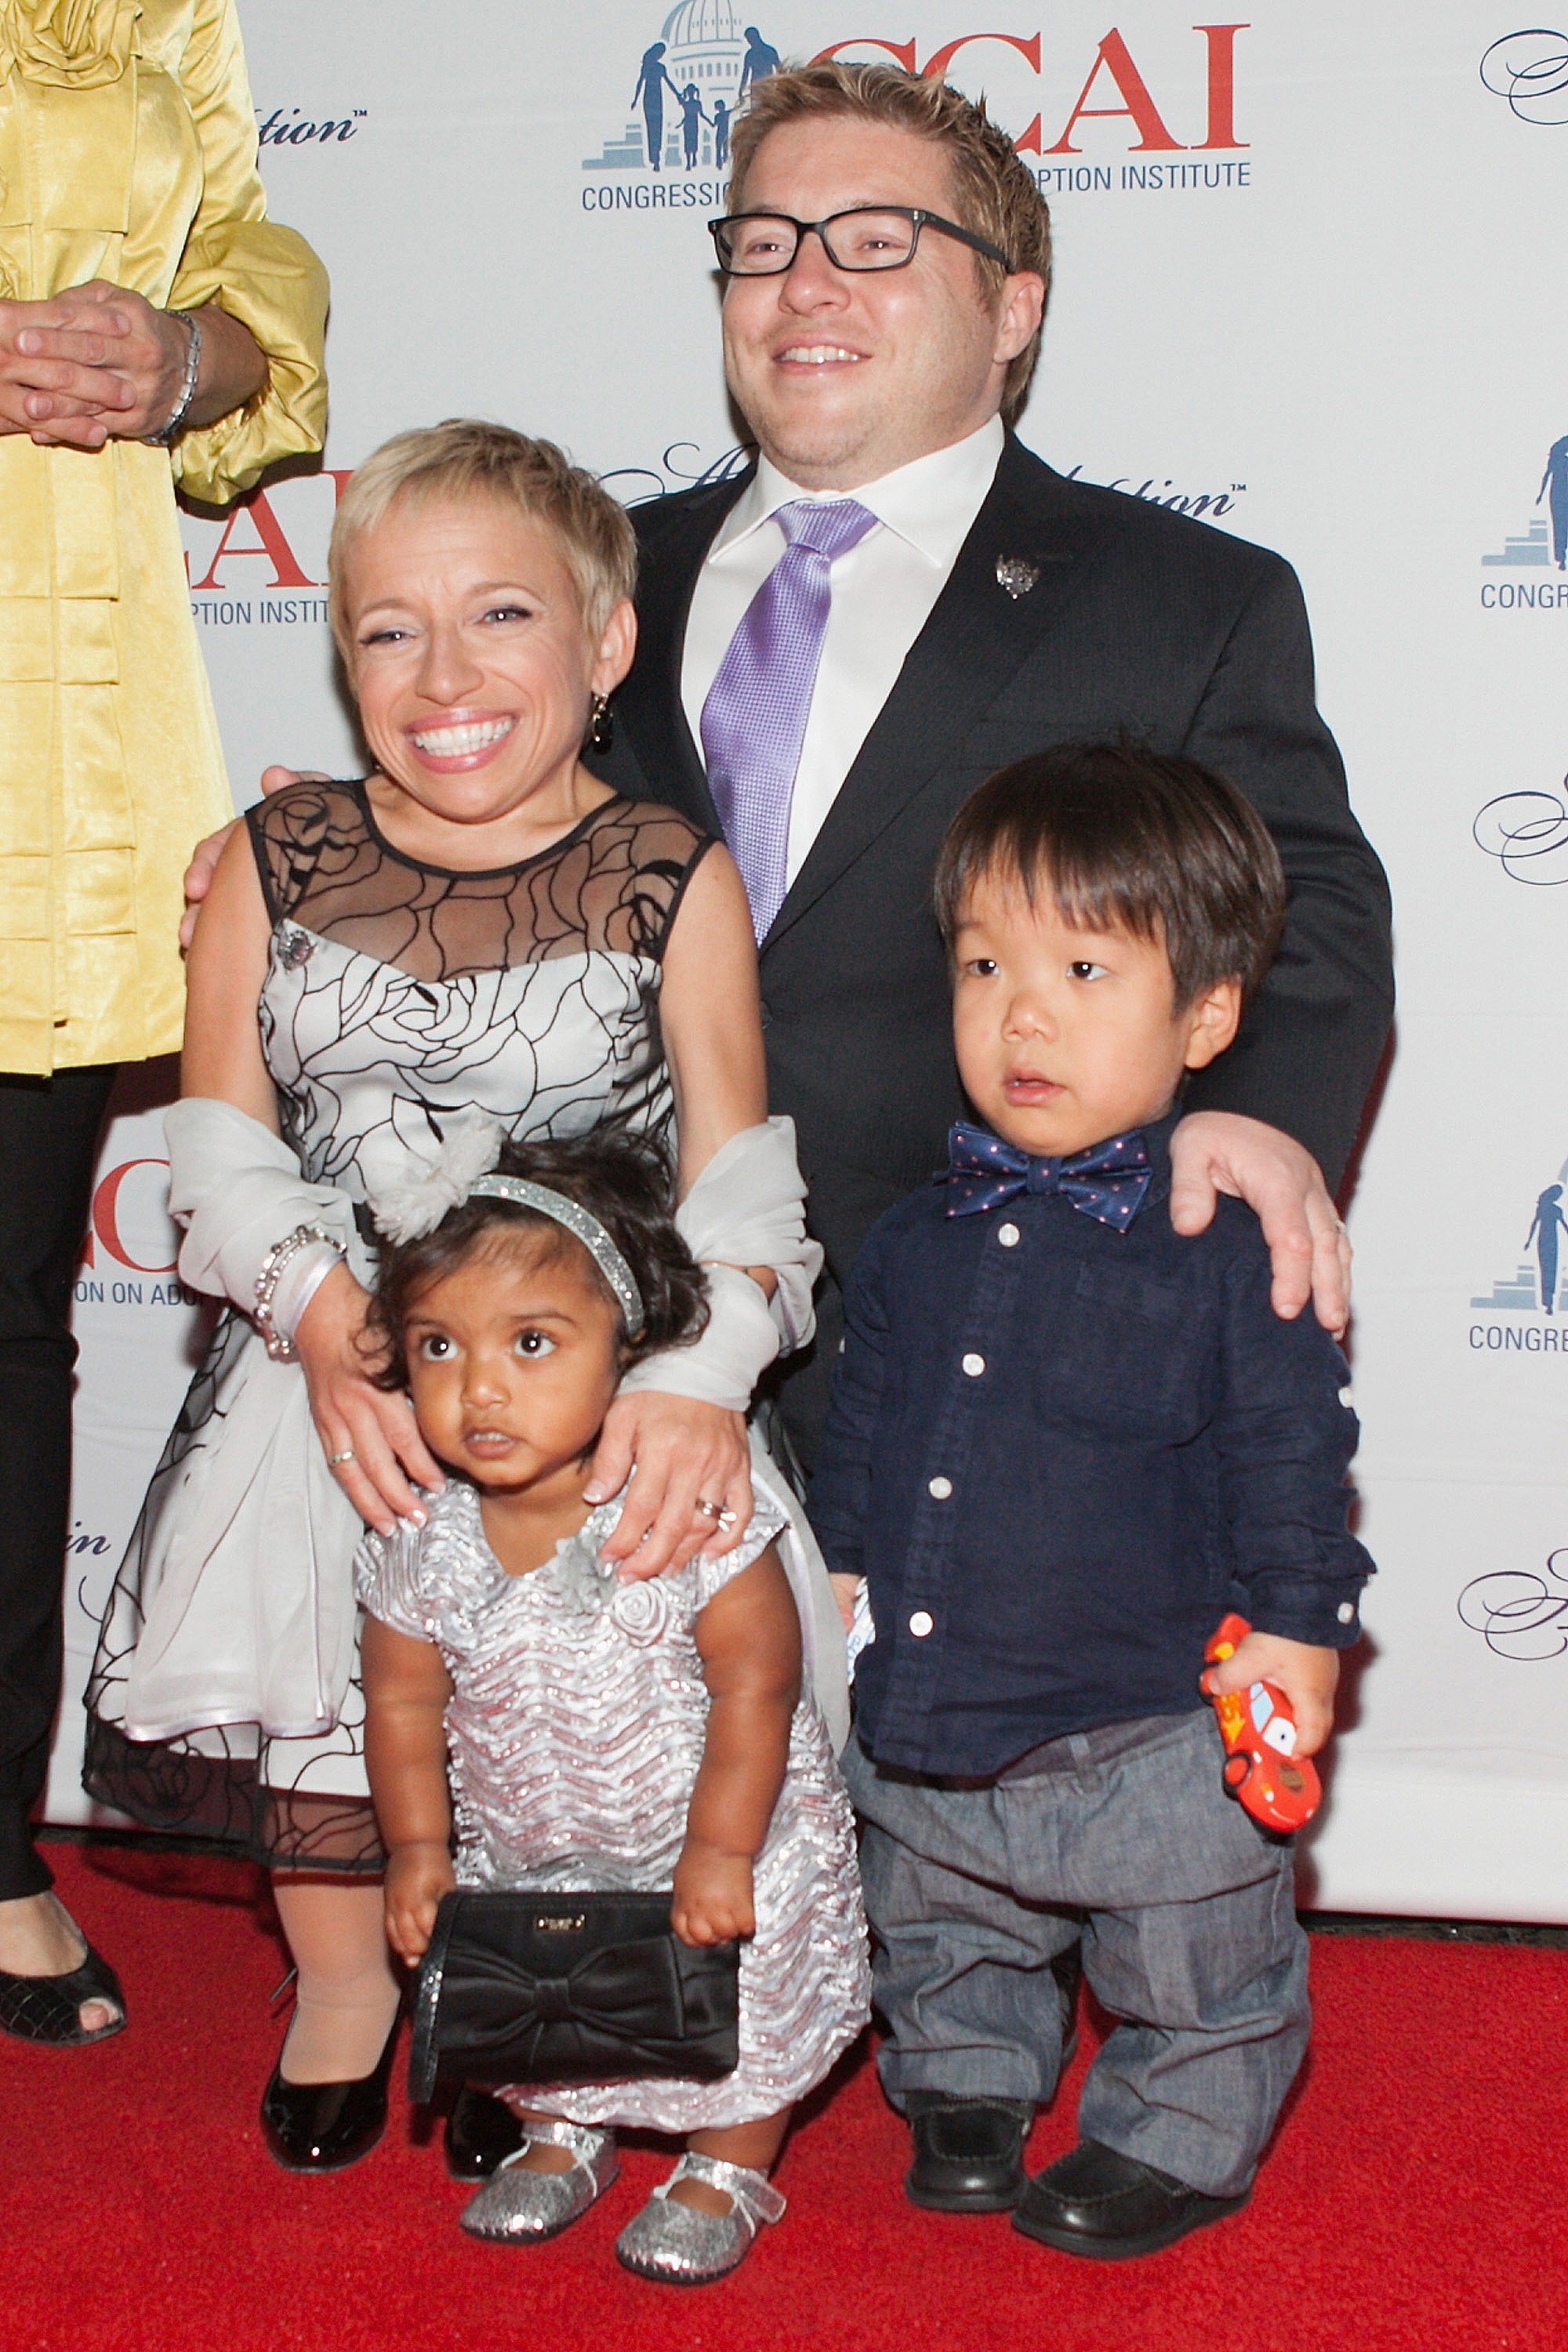  Becky Weichhand, Mark Walberg, Bill Klein, Jen Arnold with daughter Zoey, Sen. Mary Landrieu, and Jack Gerard attend the 2014 Angels In Adoption Gala in Washington, DC on September 17, 2014 | Photo: Getty Images